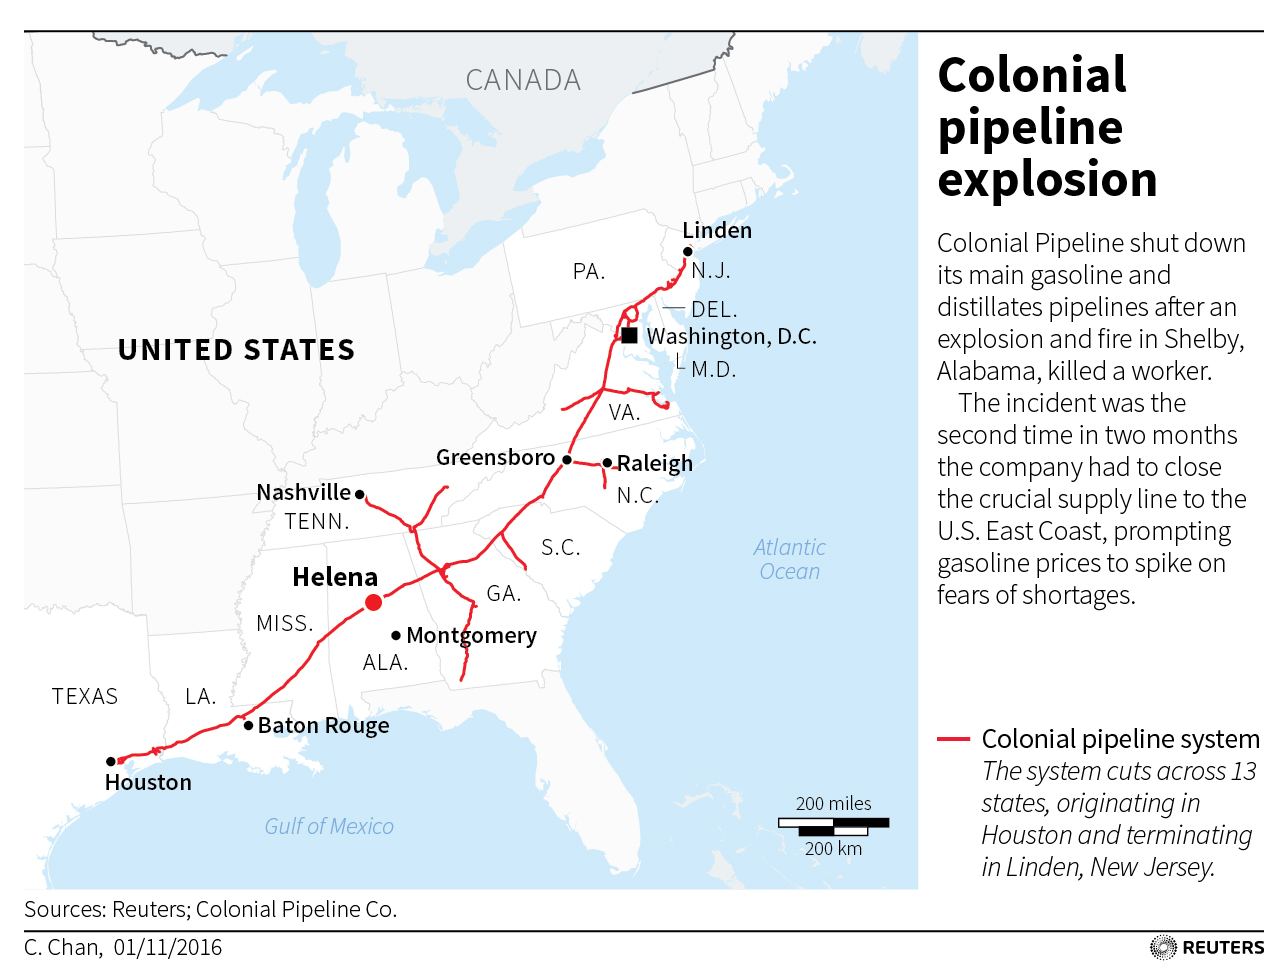 Map by Reuters and Colonial Pipeline